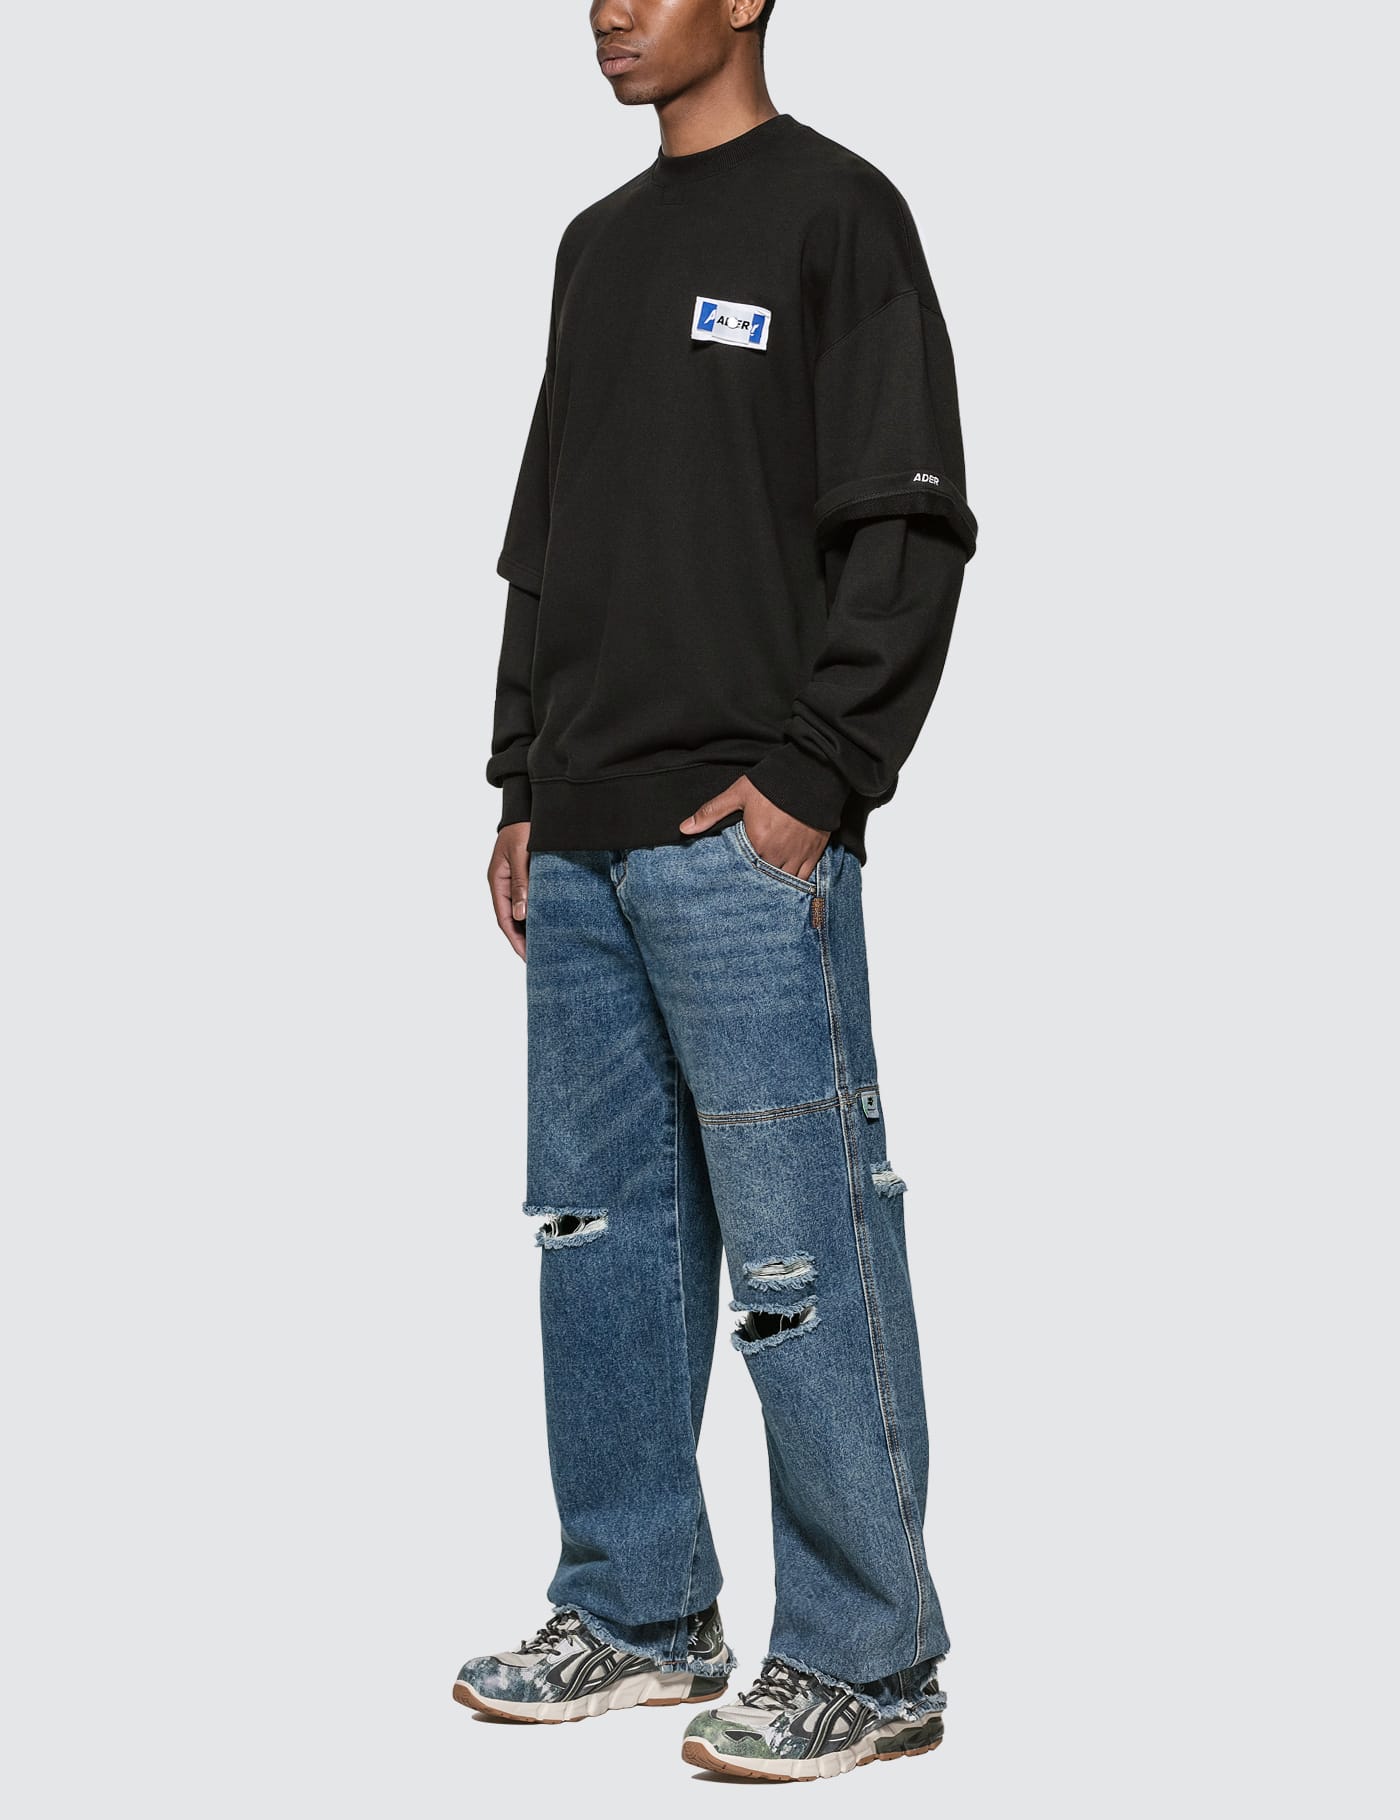 Ader Error - Oversized Neckline Long Sleeve T-Shirt | HBX - Globally  Curated Fashion and Lifestyle by Hypebeast